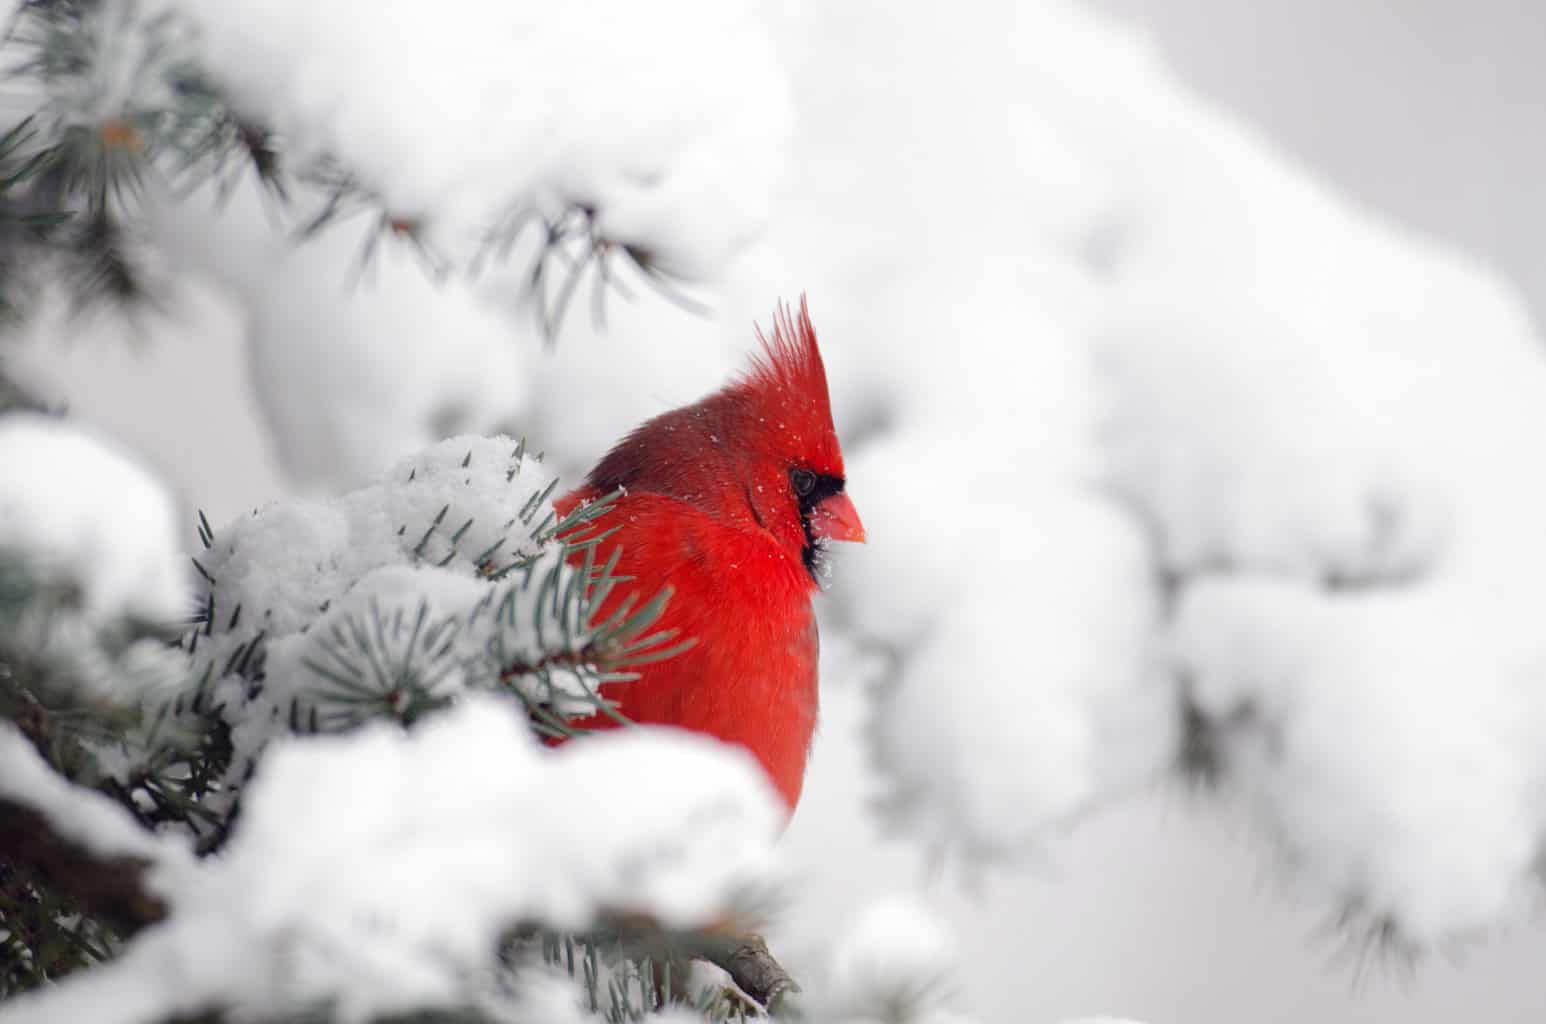 Northern cardinal perched on a snow-covered spruce